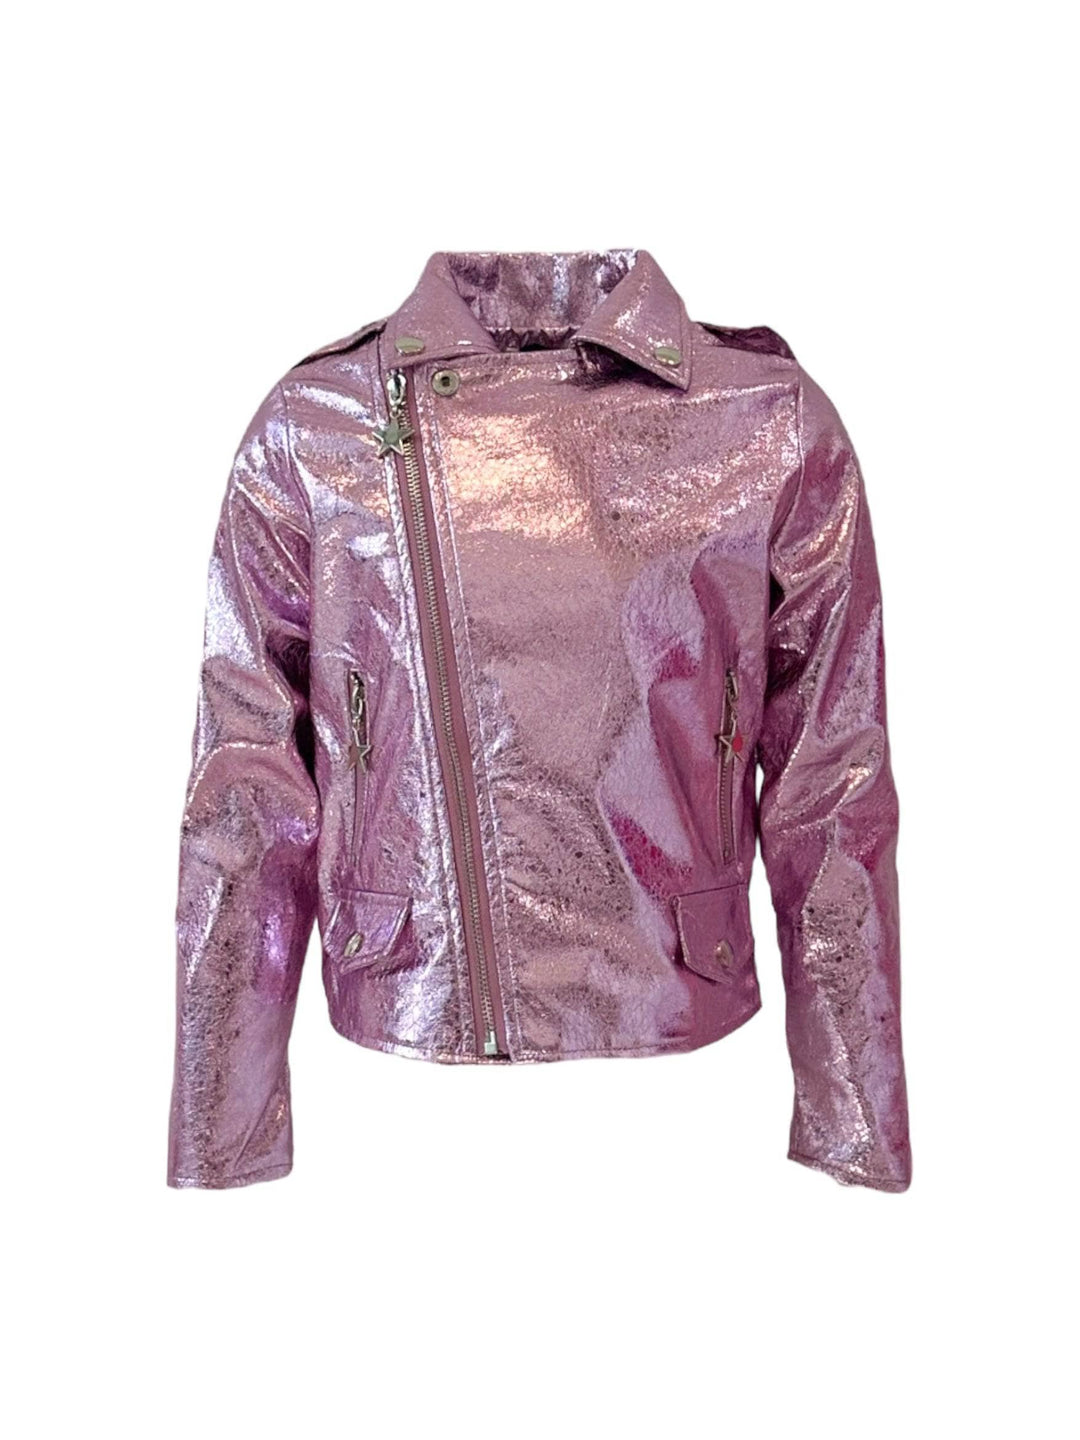 The Metallic Rose Moto Jacket by Lola and The Boys